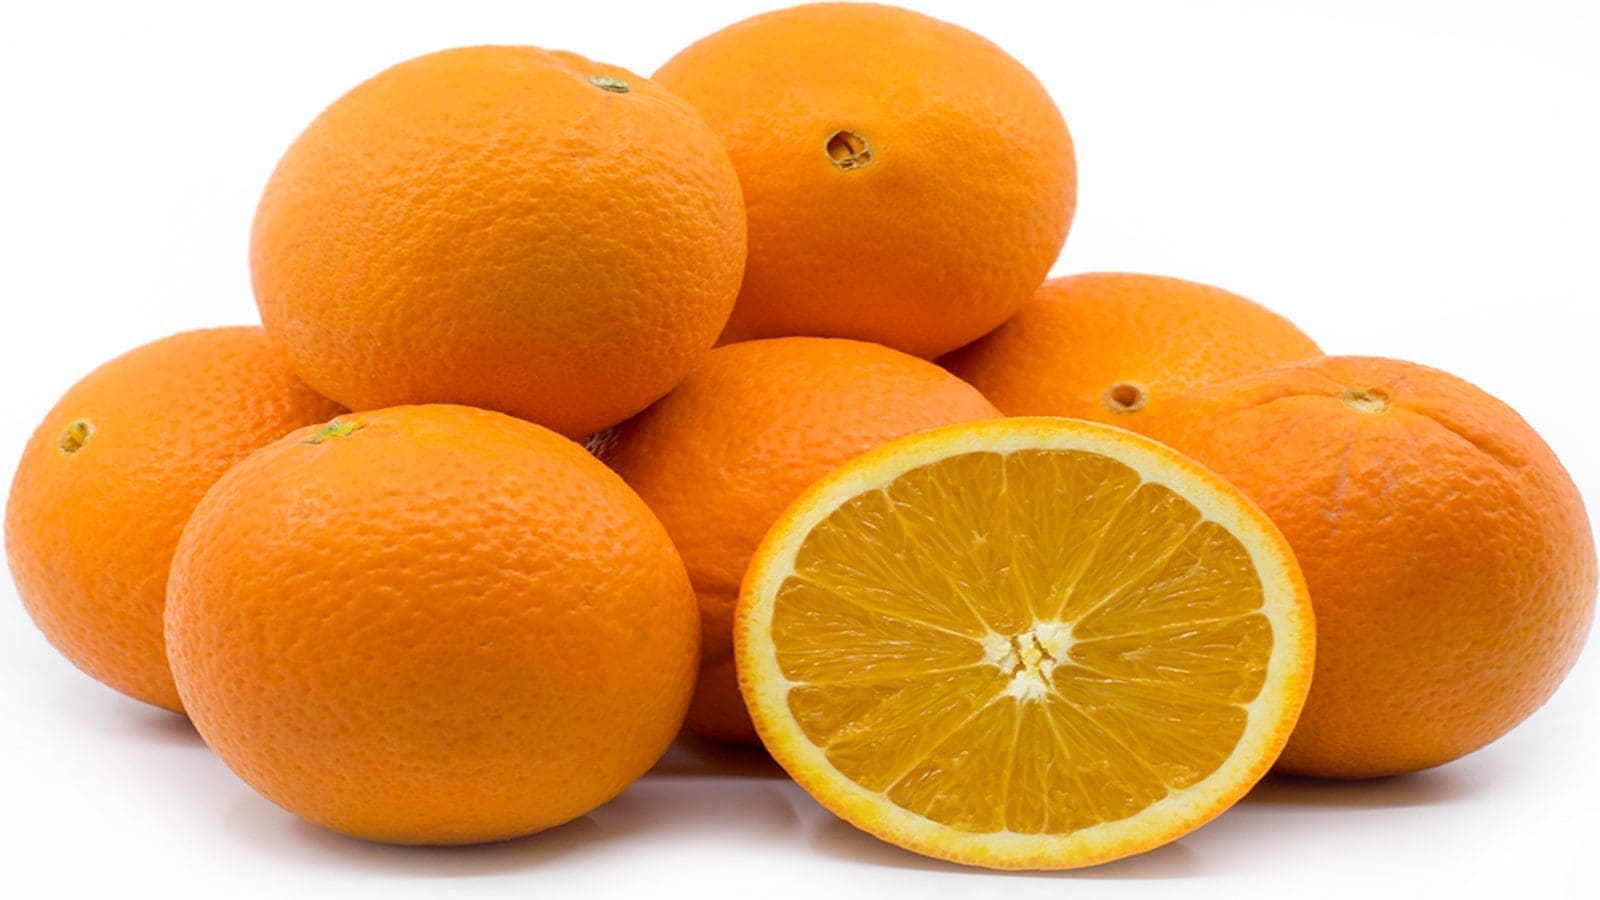 European Commission approves new cold treatment requirements for South African citrus imports